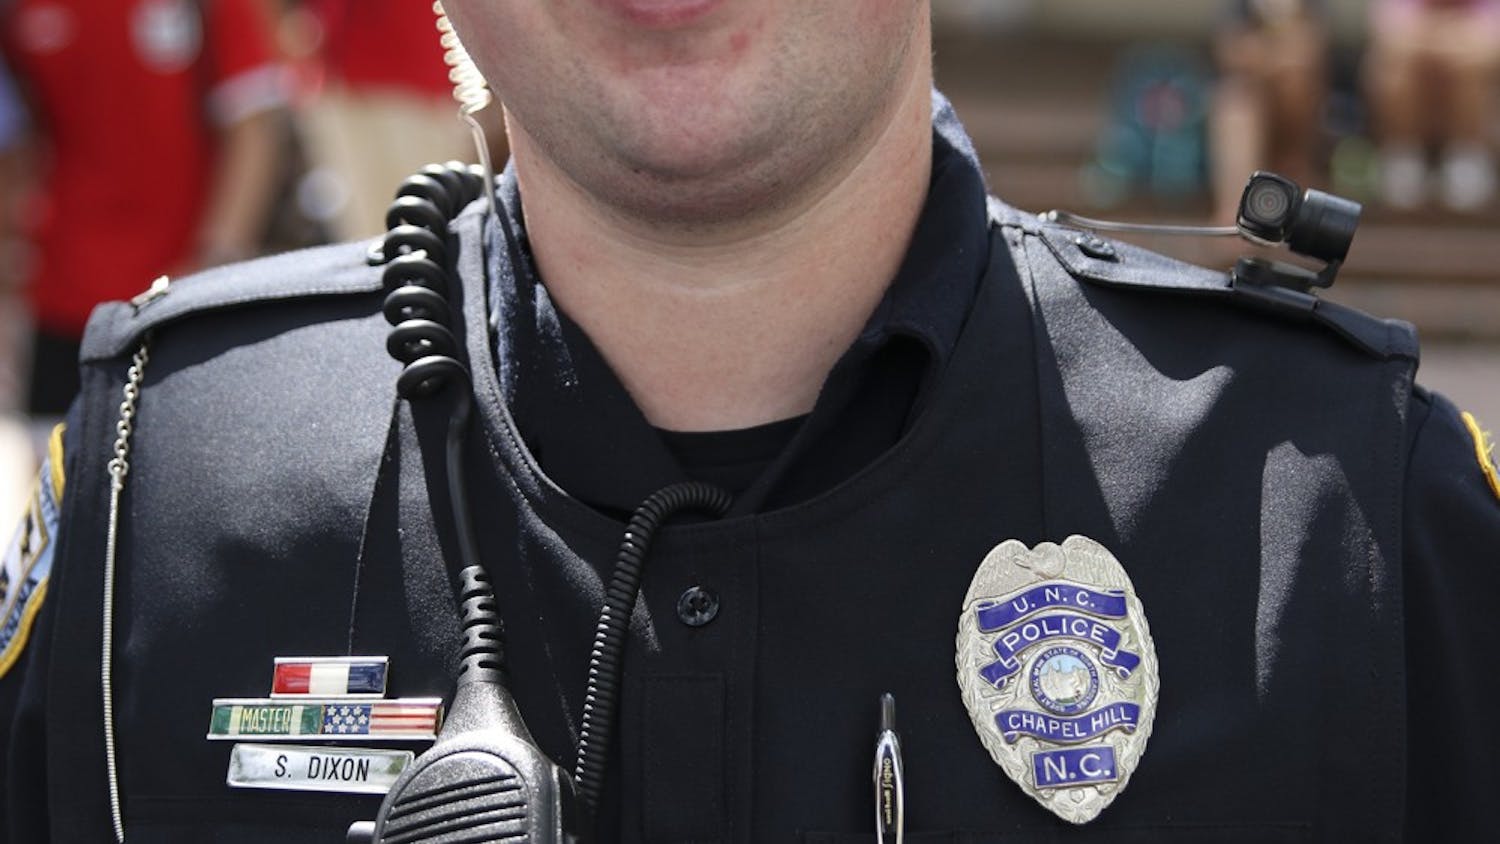 Officer S. Dixon wears a body camera on his left shoulder in the Pit on Wednesday August 24th.